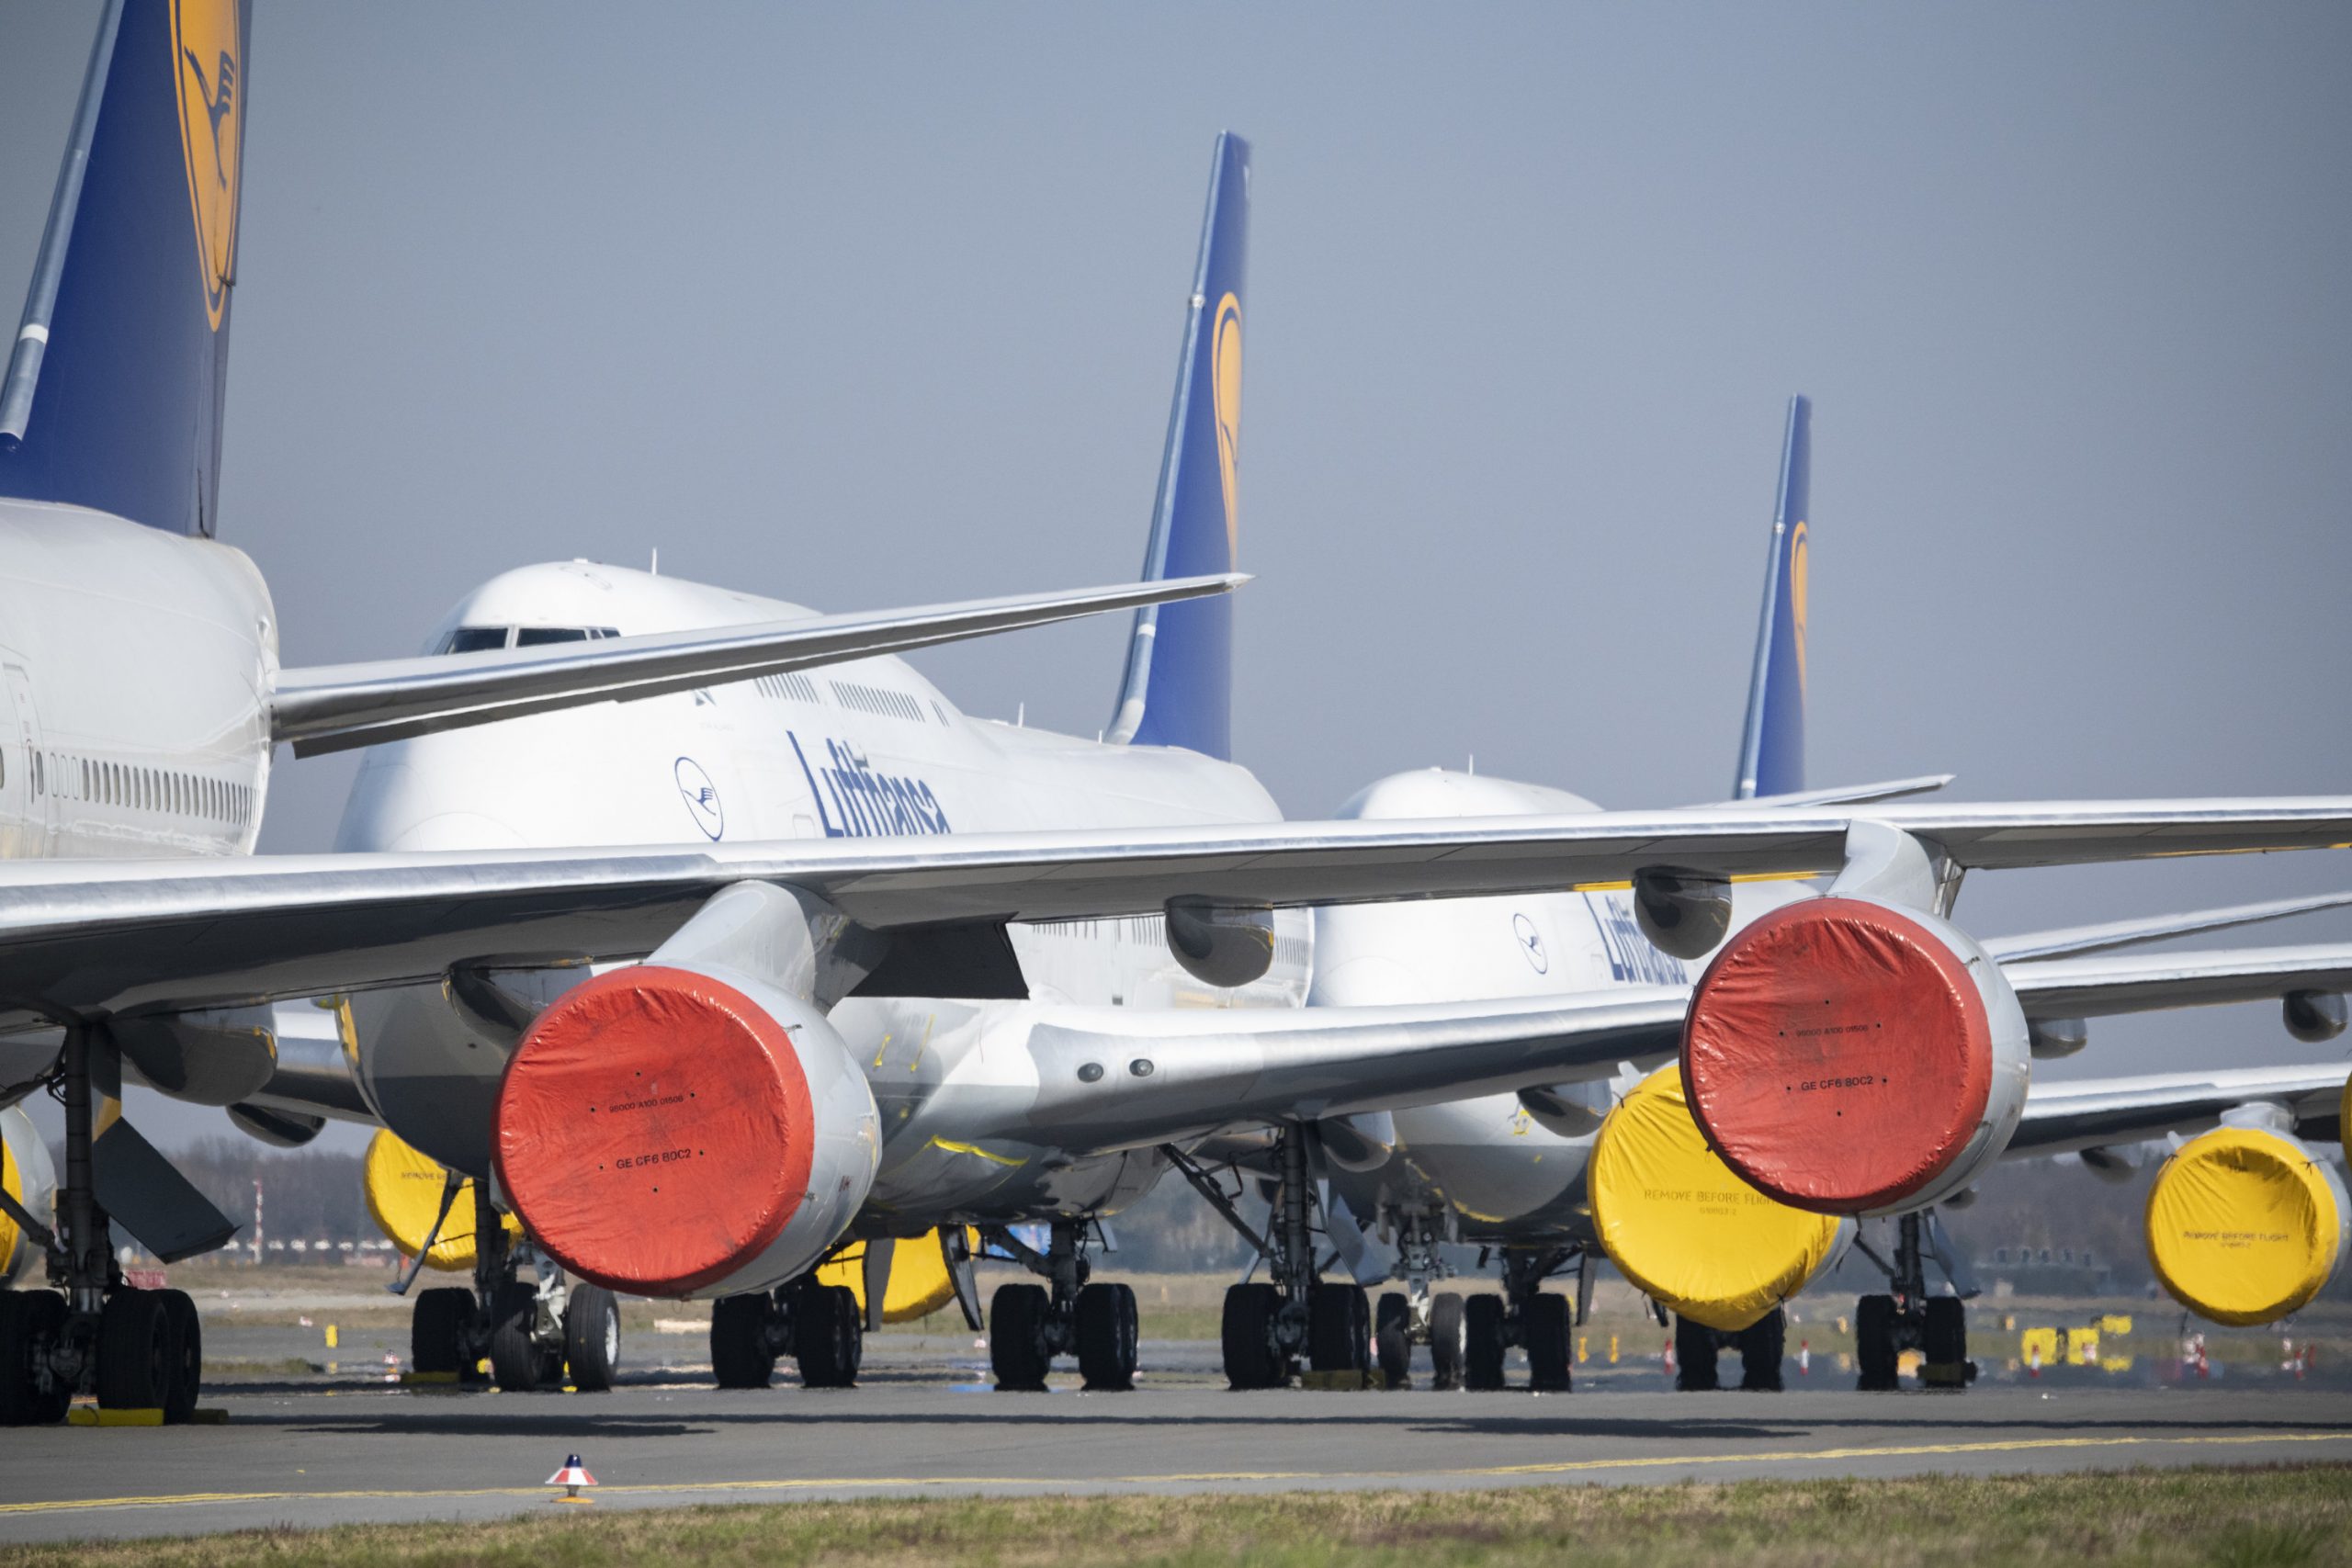 02 April 2020, Hessen, Frankfurt_Main: Lufthansa aircrafts stand on the runway at Frankfurt Airport as Lufthansa will extend its reduced schedule by two weeks, up to May 3 due to the coronavirus outbreak. Photo: Boris Roessler/dpa/Boris Roessler/dpa